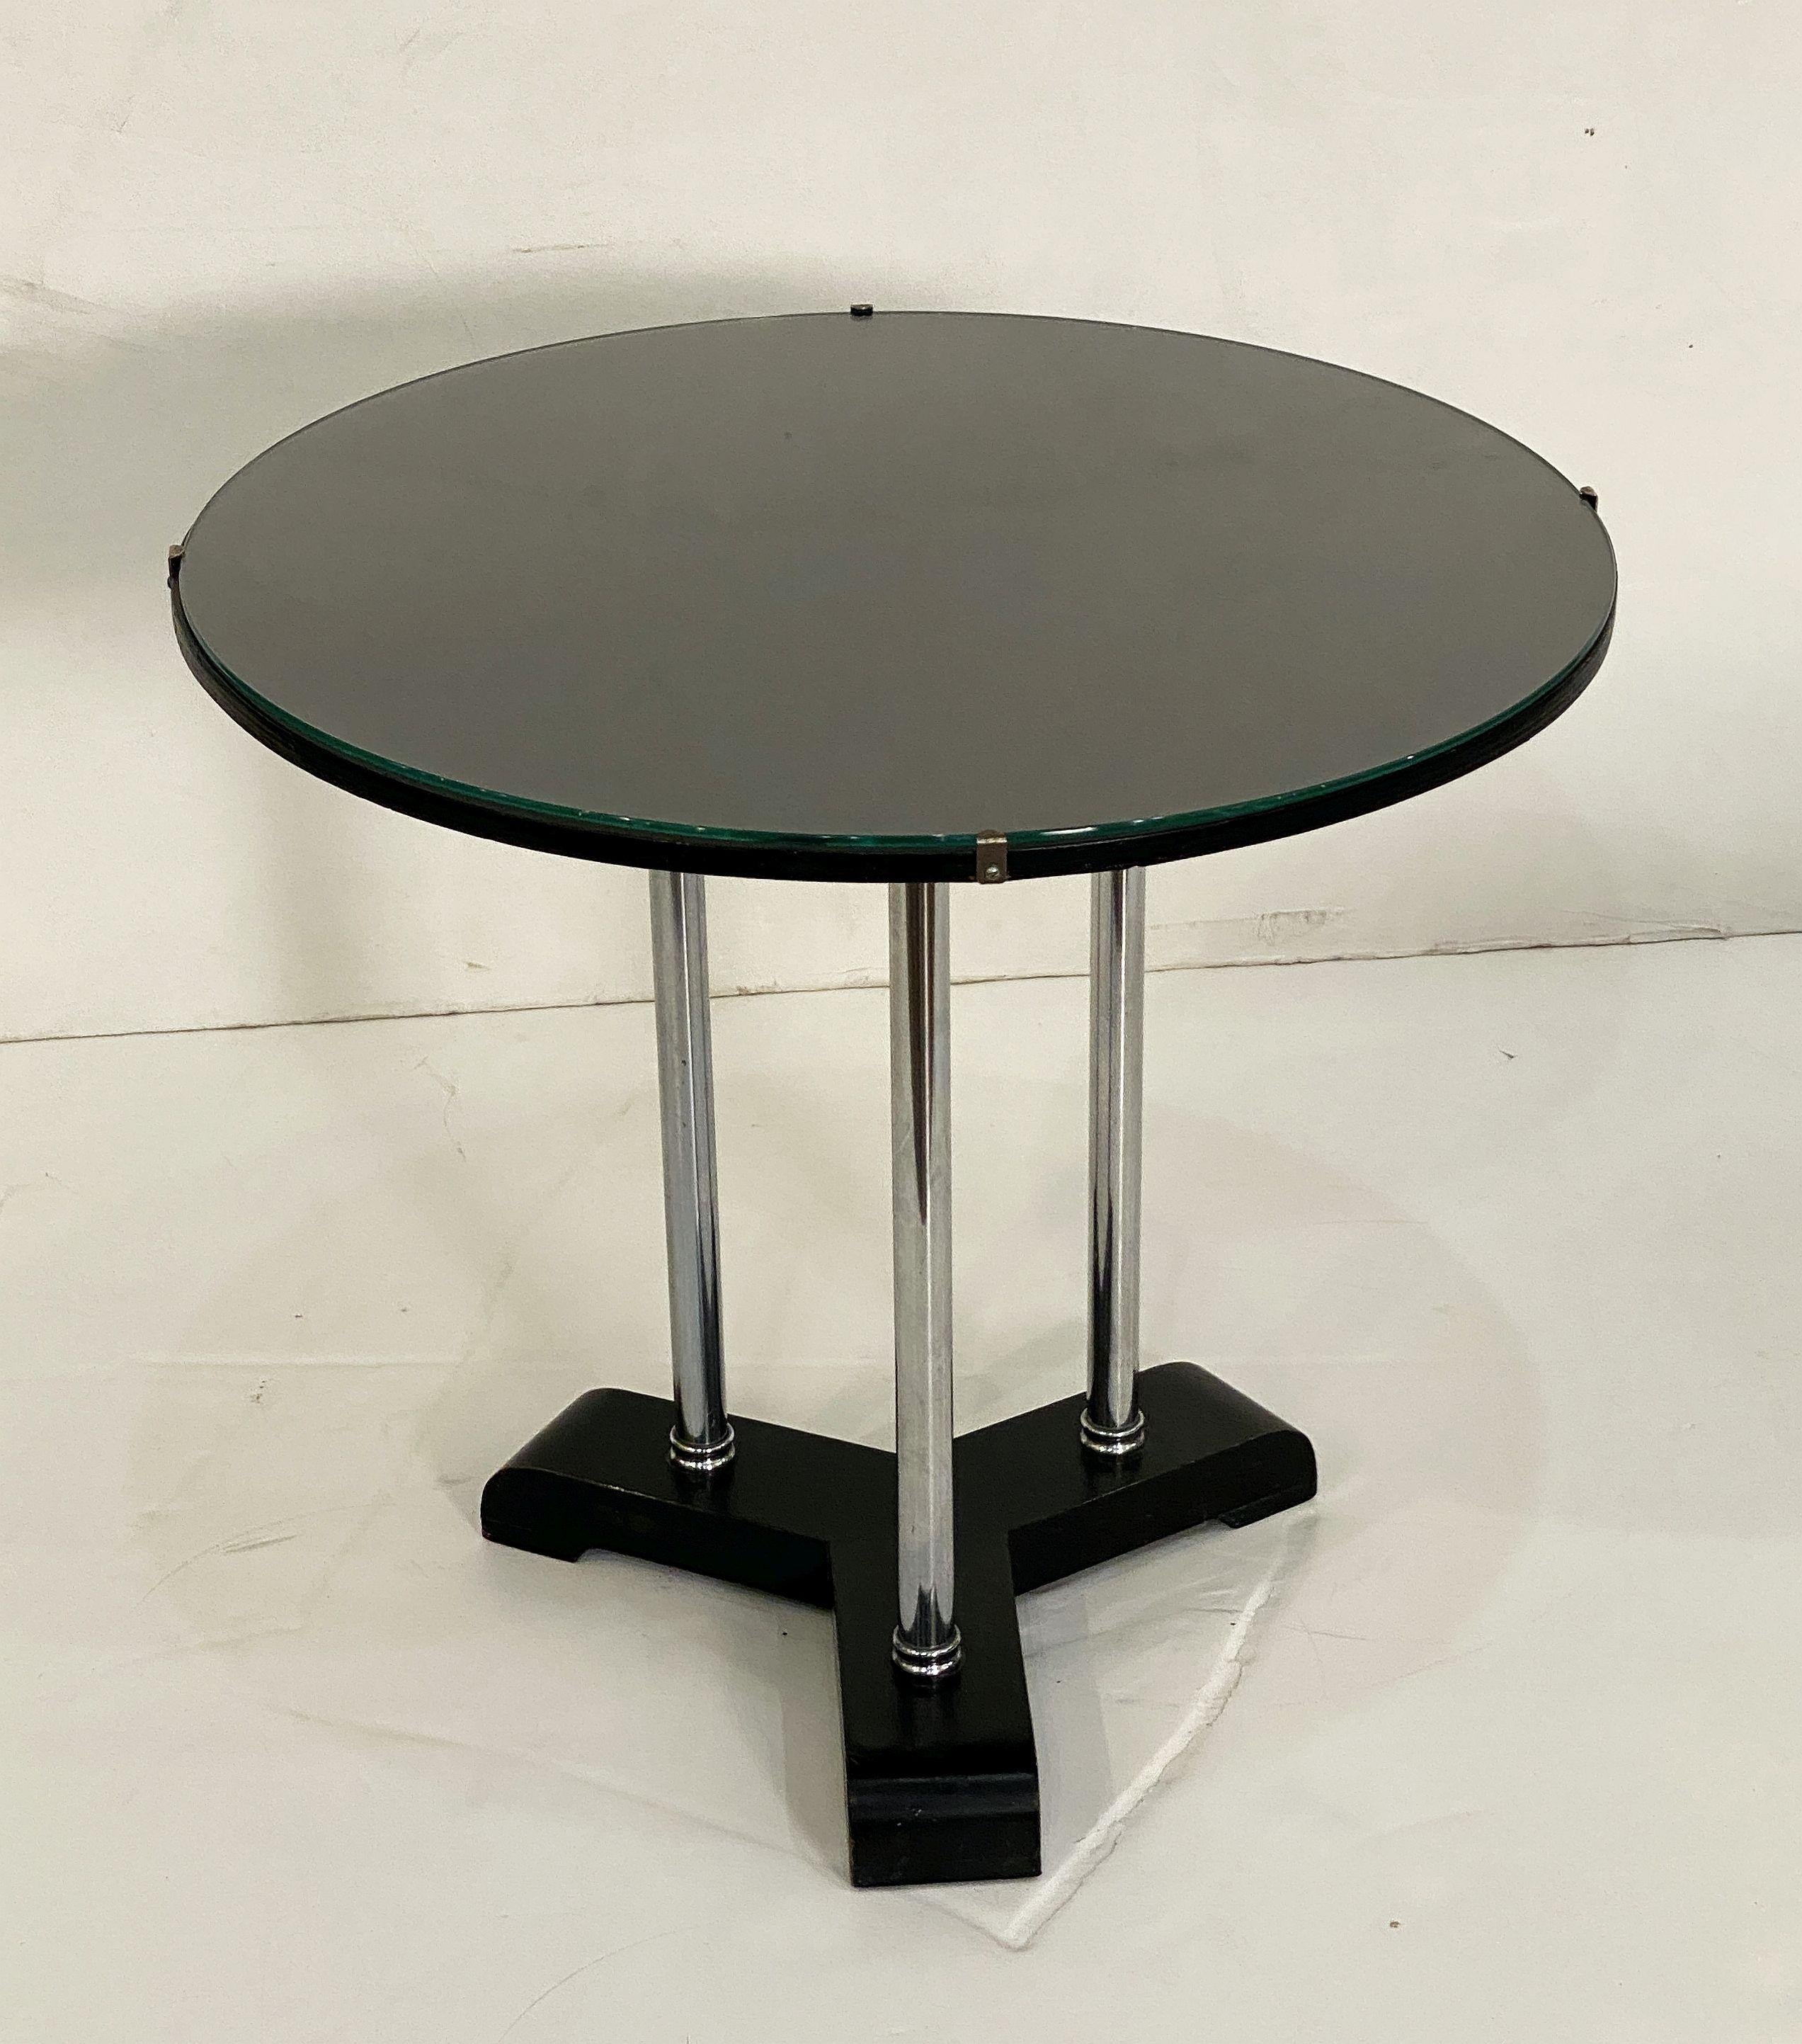 English Art Deco Round Drinks Tripod Table of Chrome, Ebonized Wood, and Glass For Sale 2